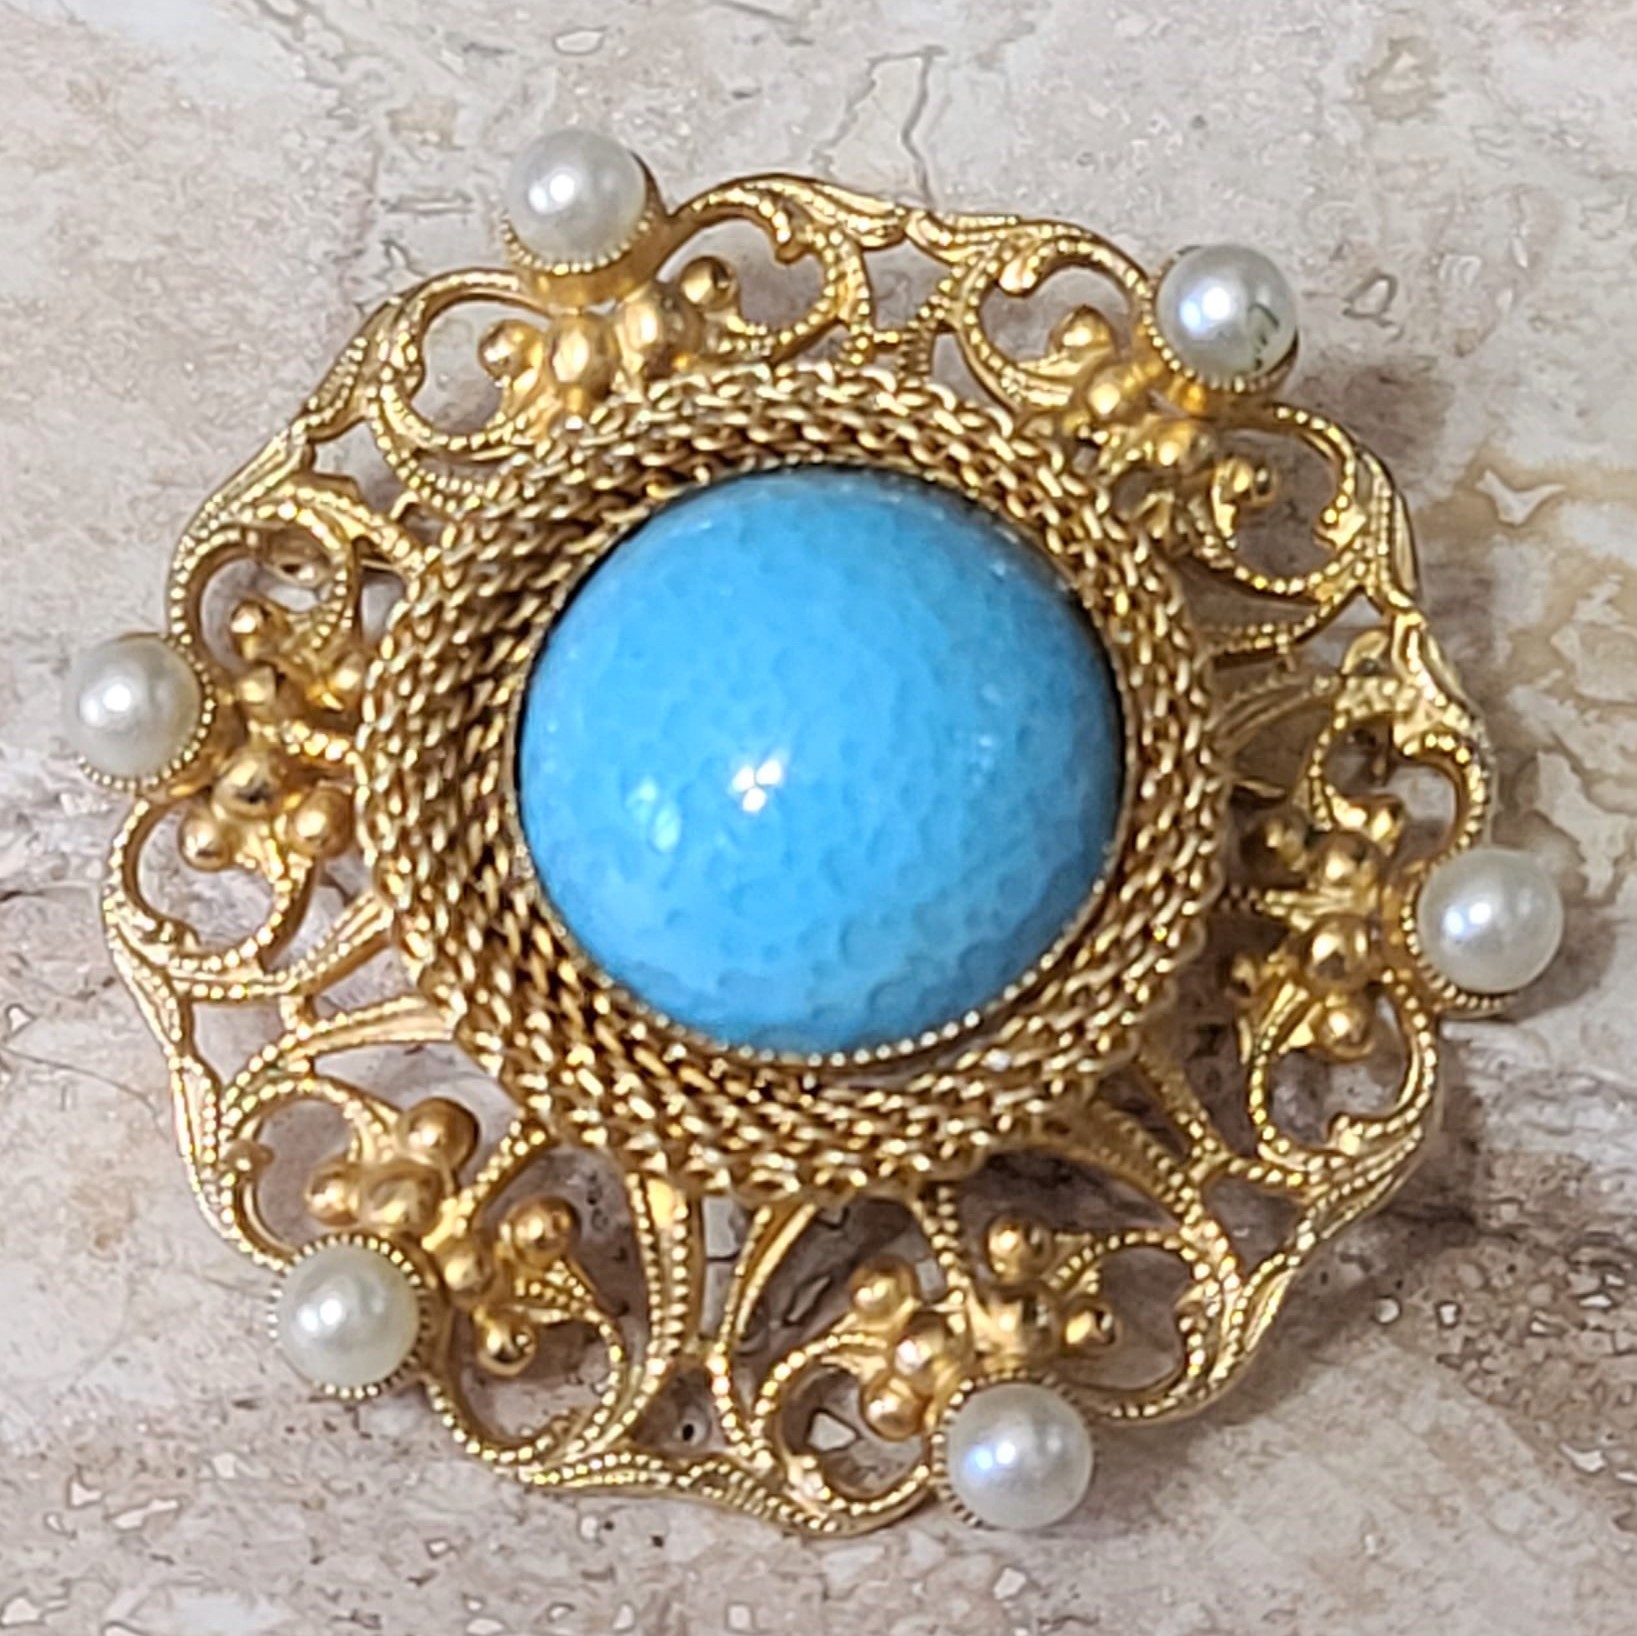 Turquoise Center Brooch, Pin, Turquoise Cabachon and Pearls